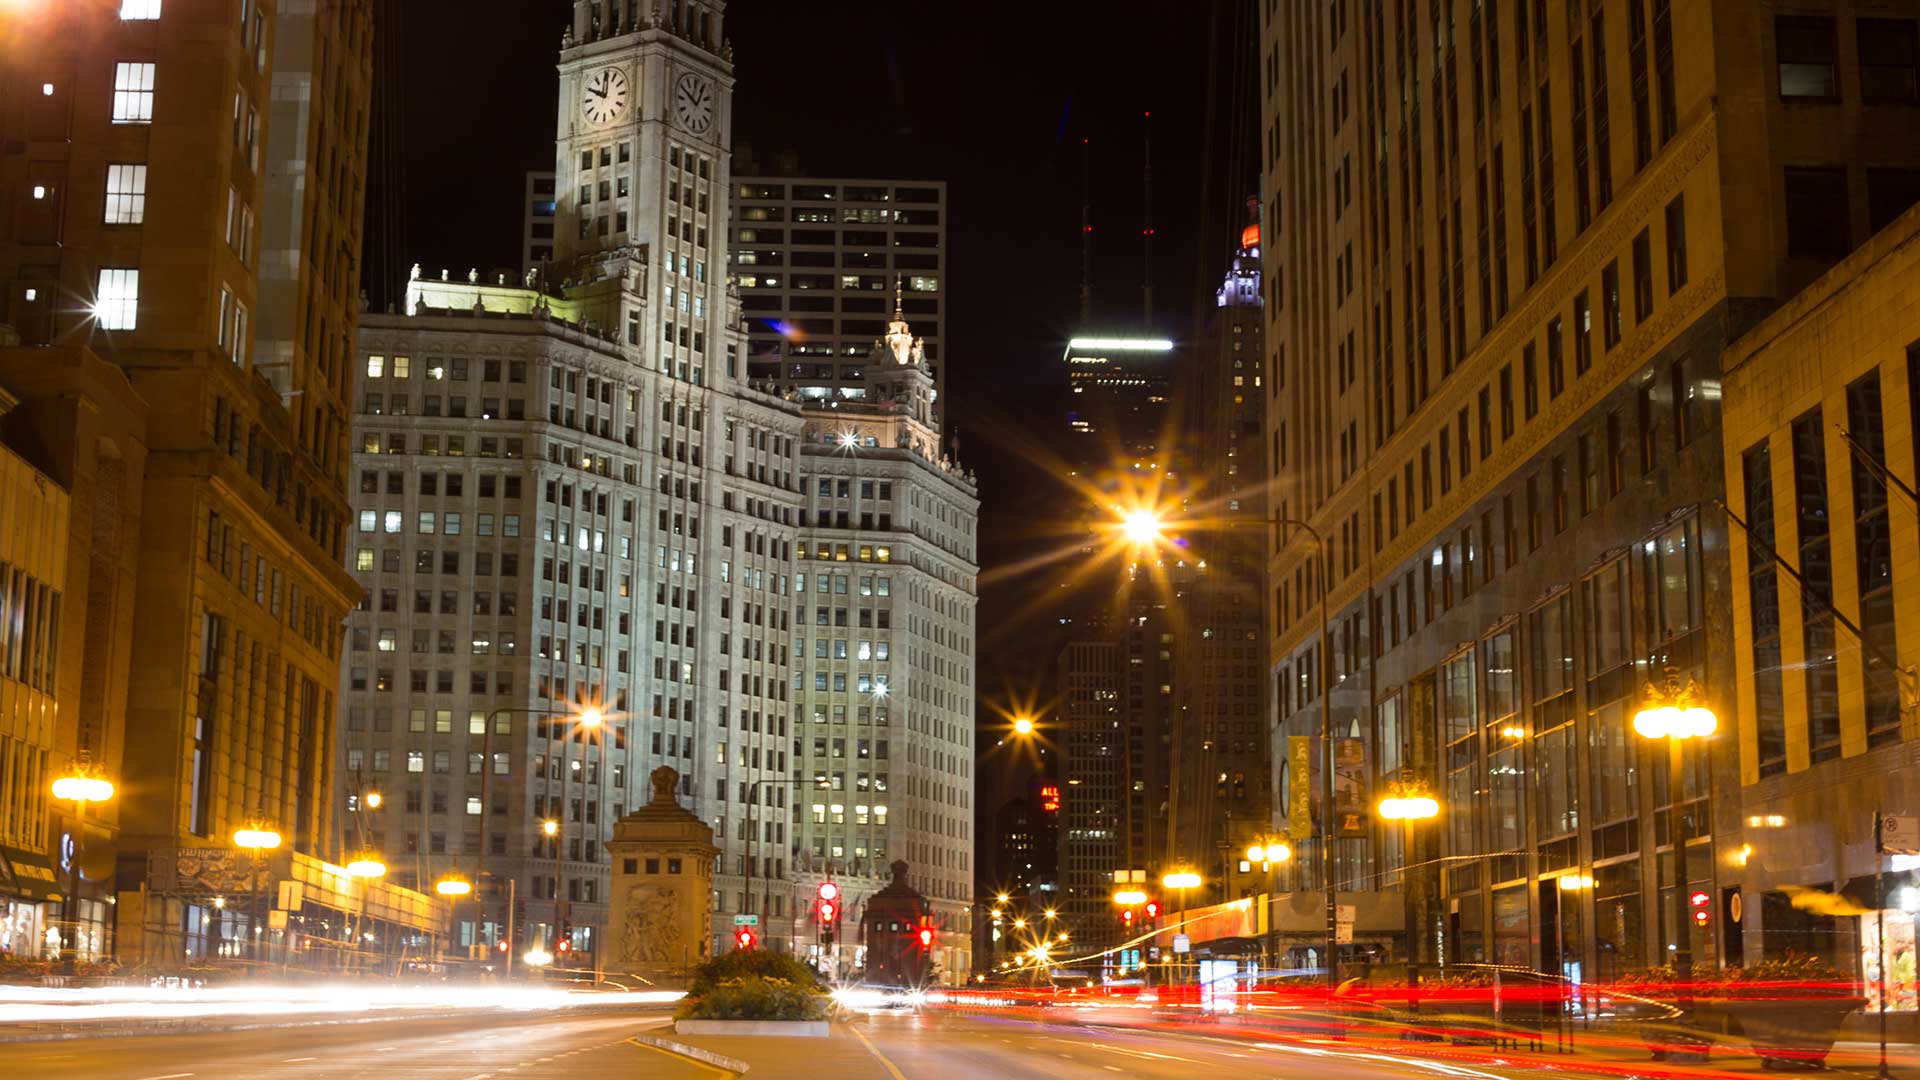 Looking down Michigan Avenue in Chicago at night. A time lapse shows cars coming and going in streaks of red and white light.